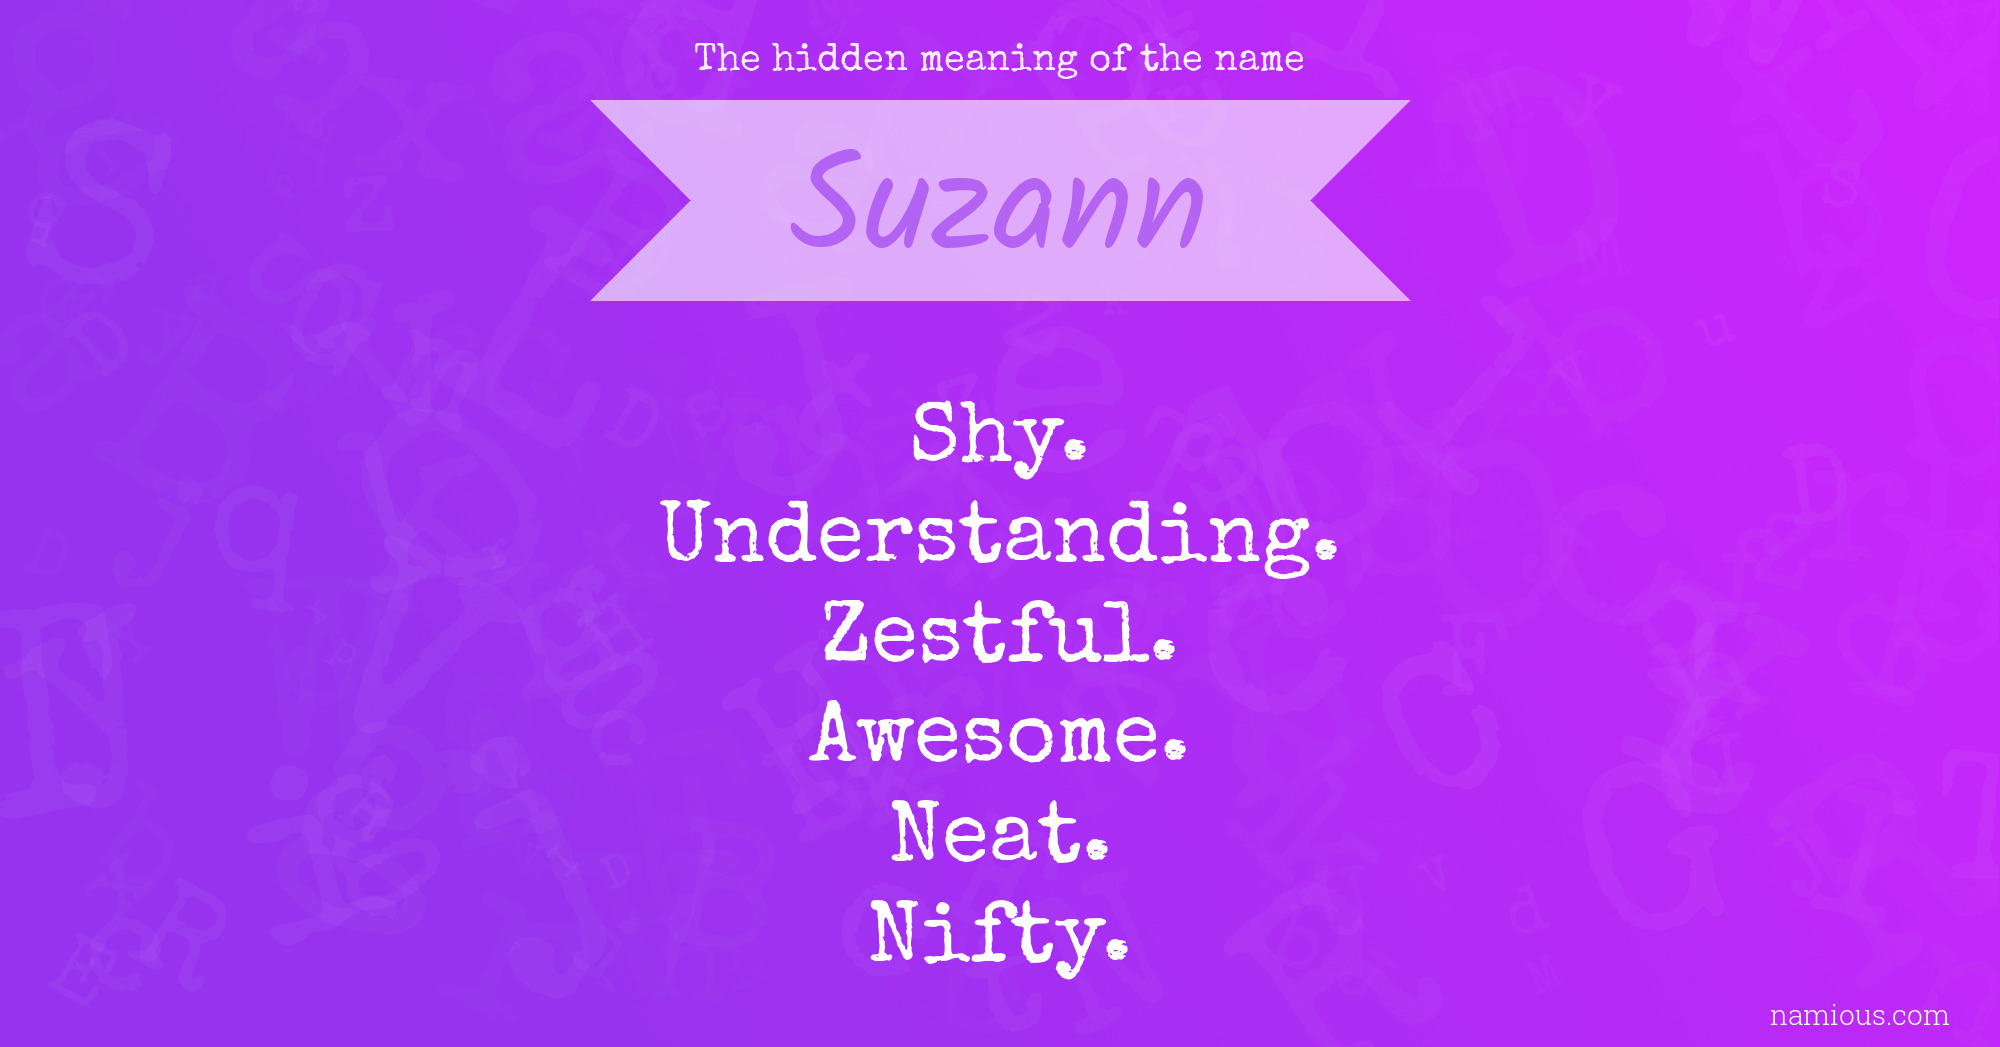 The hidden meaning of the name Suzann